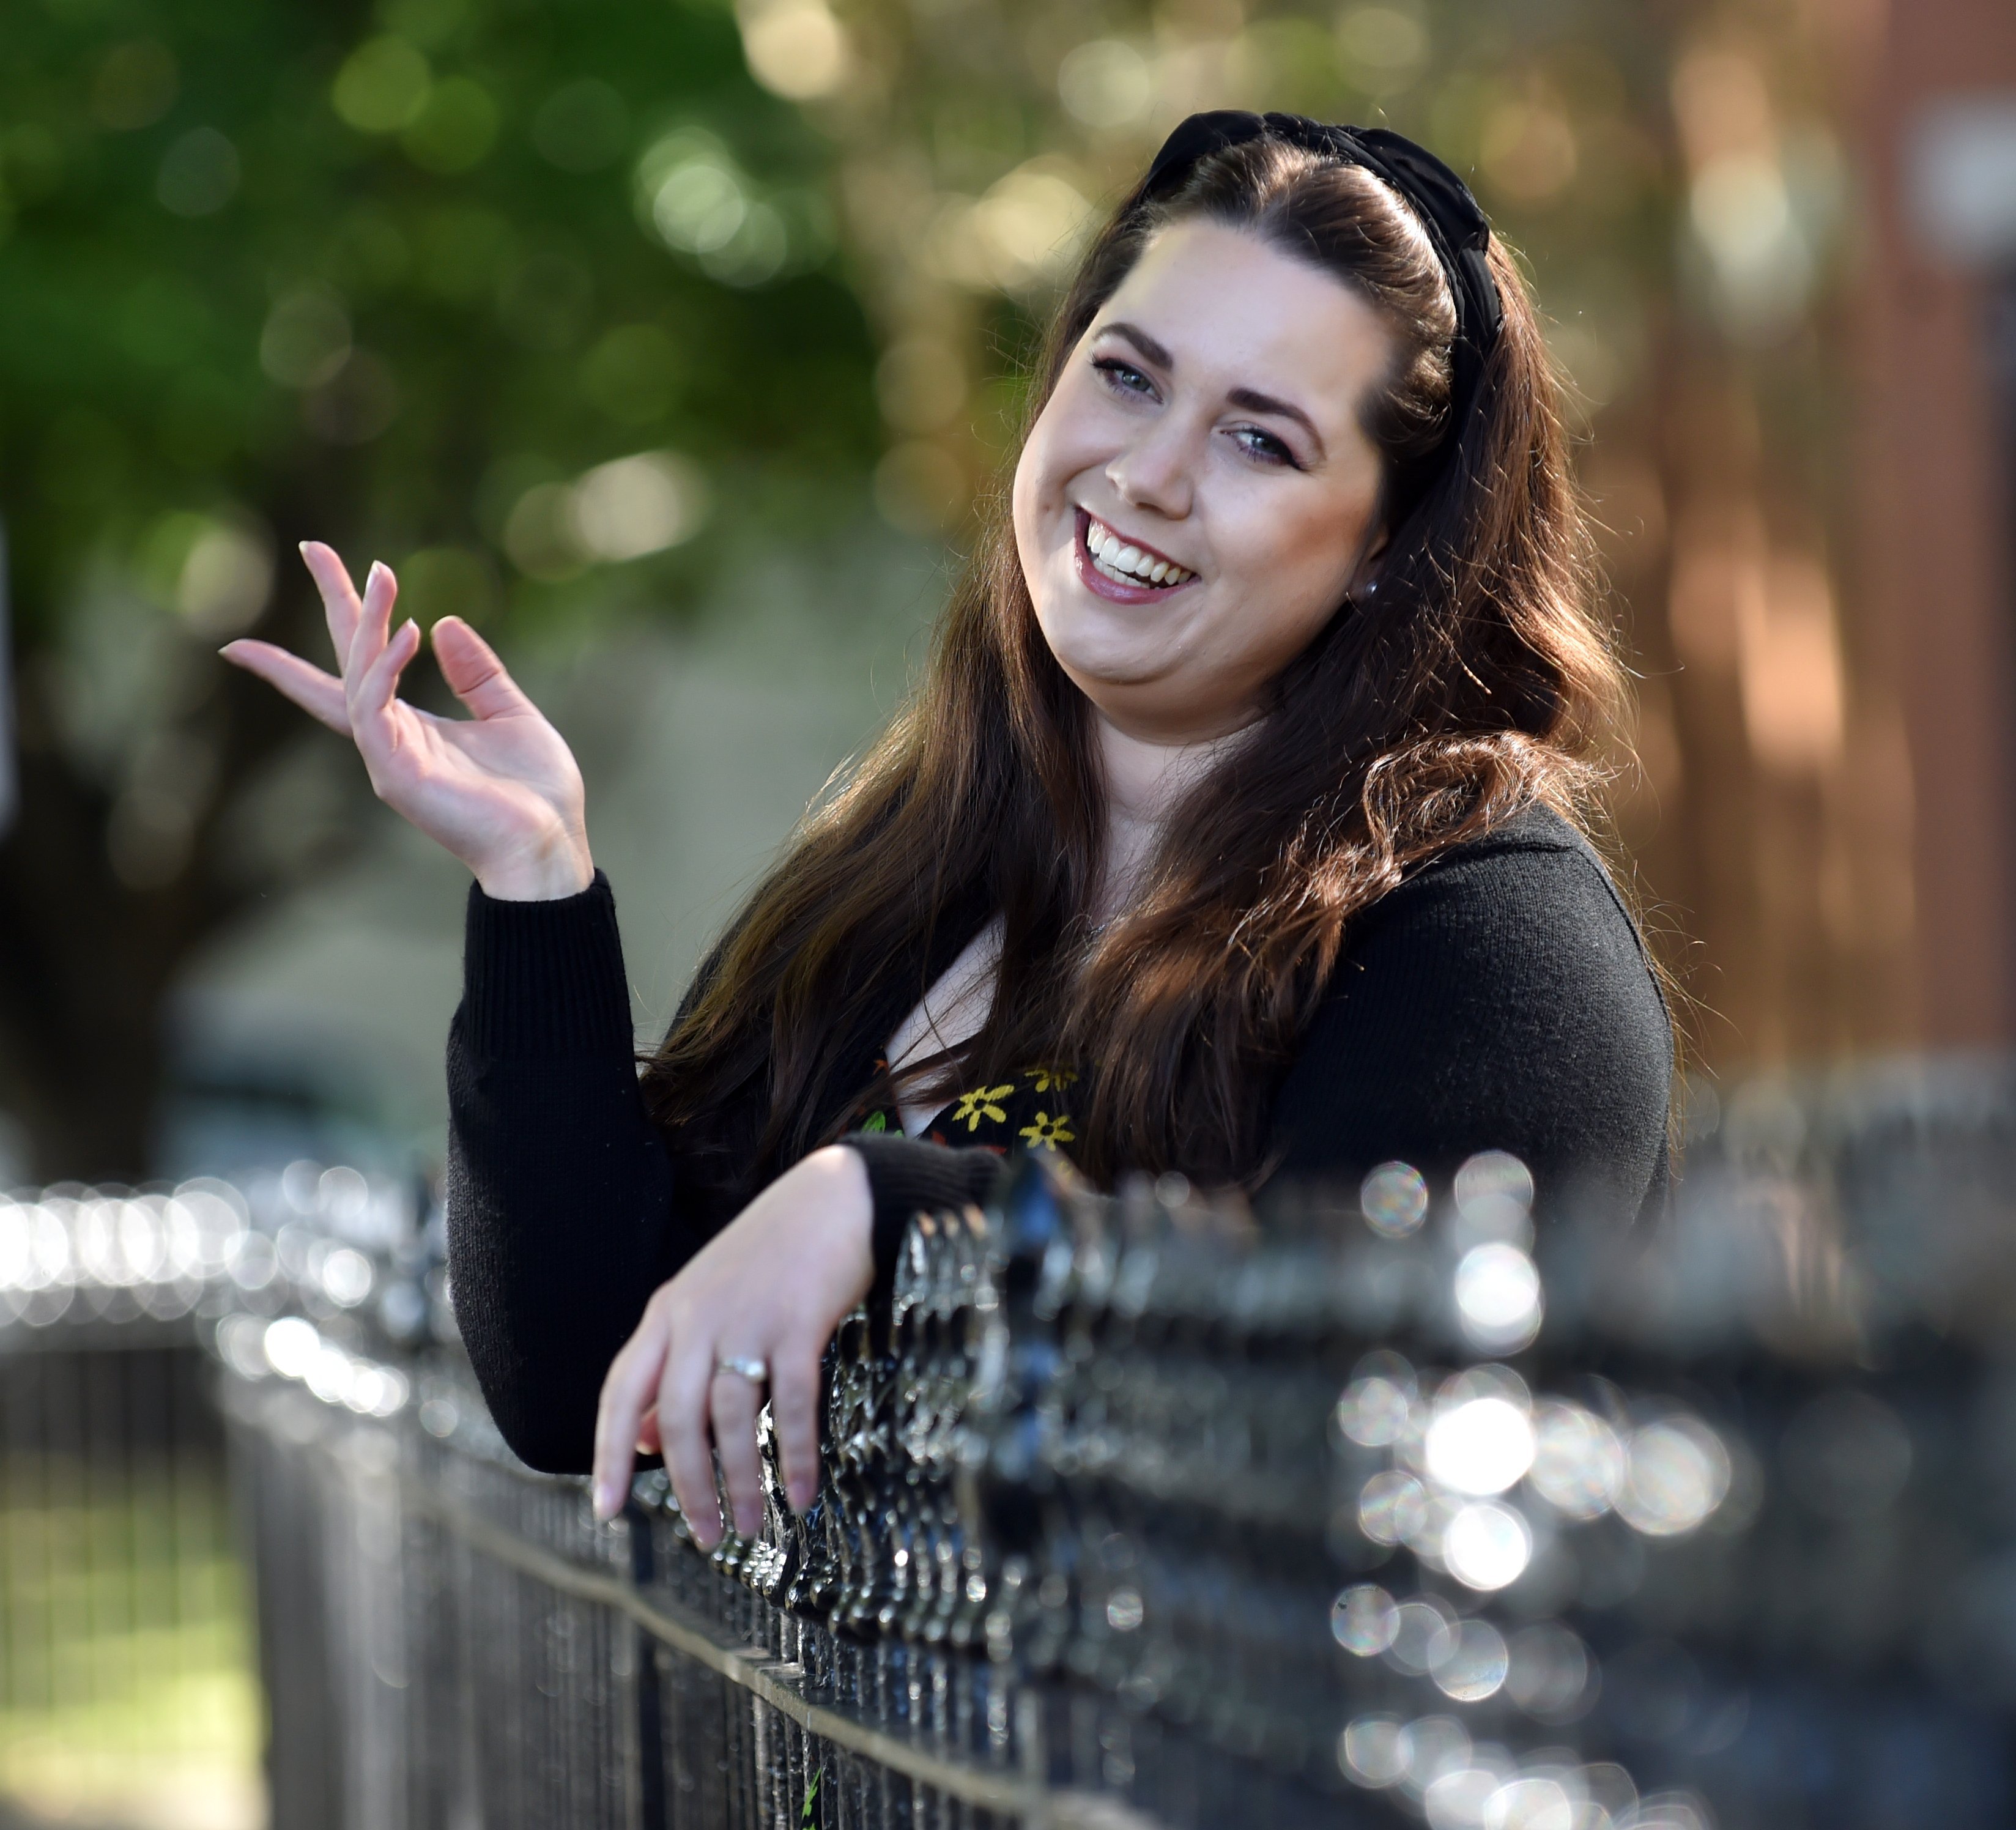 Opening up . . . Dunedin artist Chelsea McRae will be debuting her show THERAPY: A Comedy Cabaret...